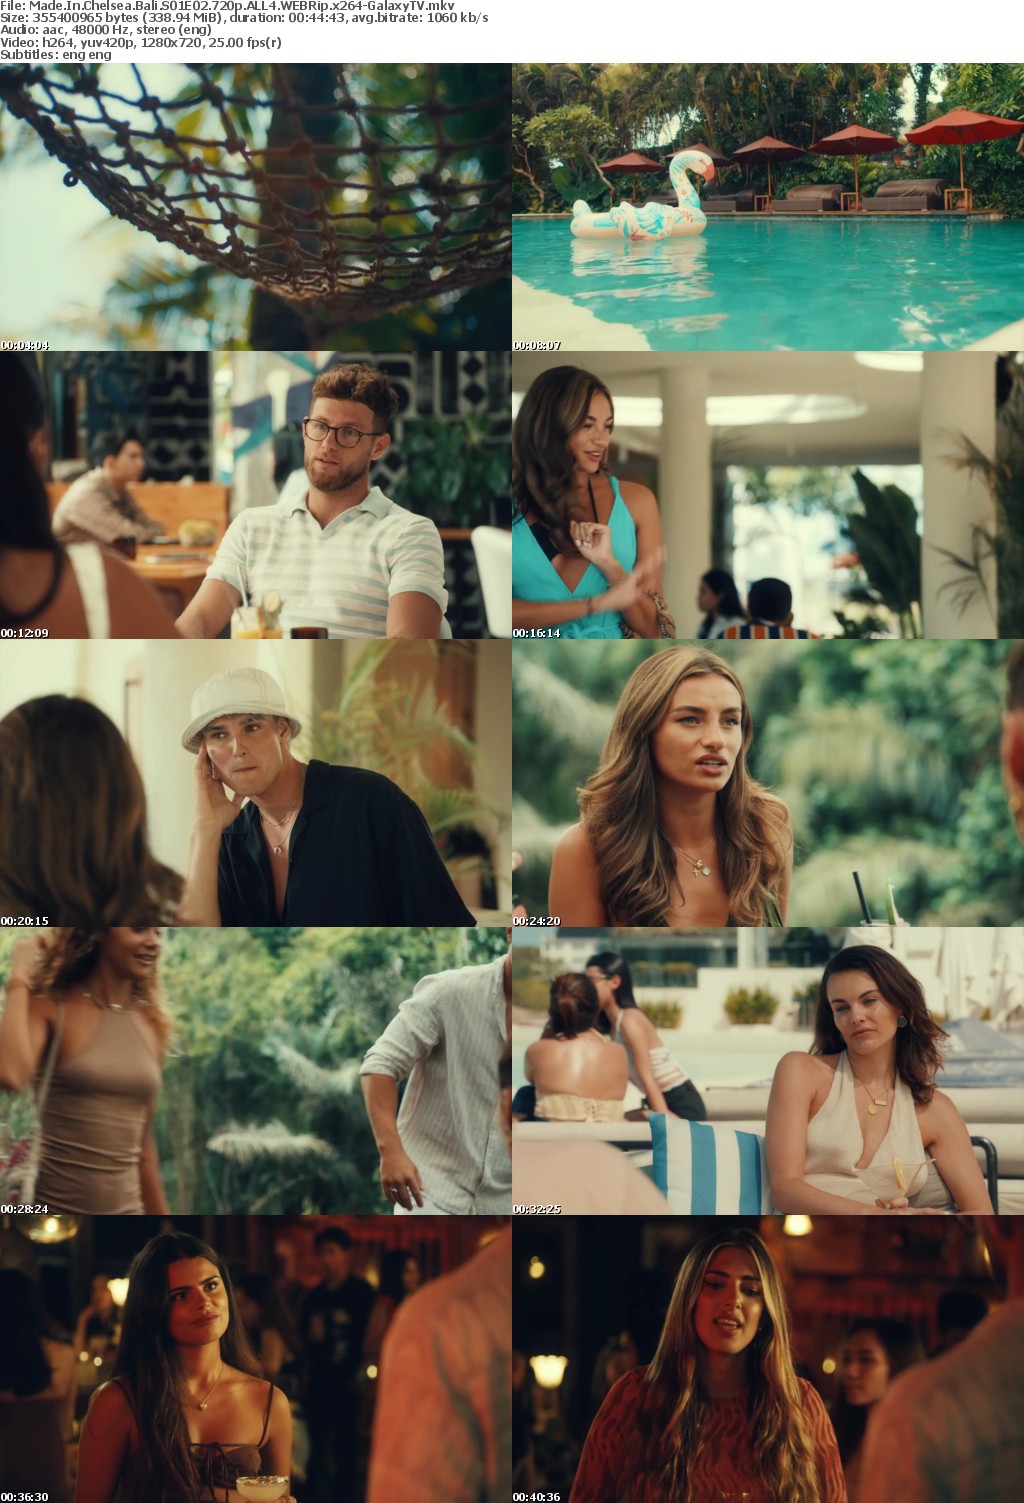 Made In Chelsea Bali S01 COMPLETE 720p ALL4 WEBRip x264-GalaxyTV